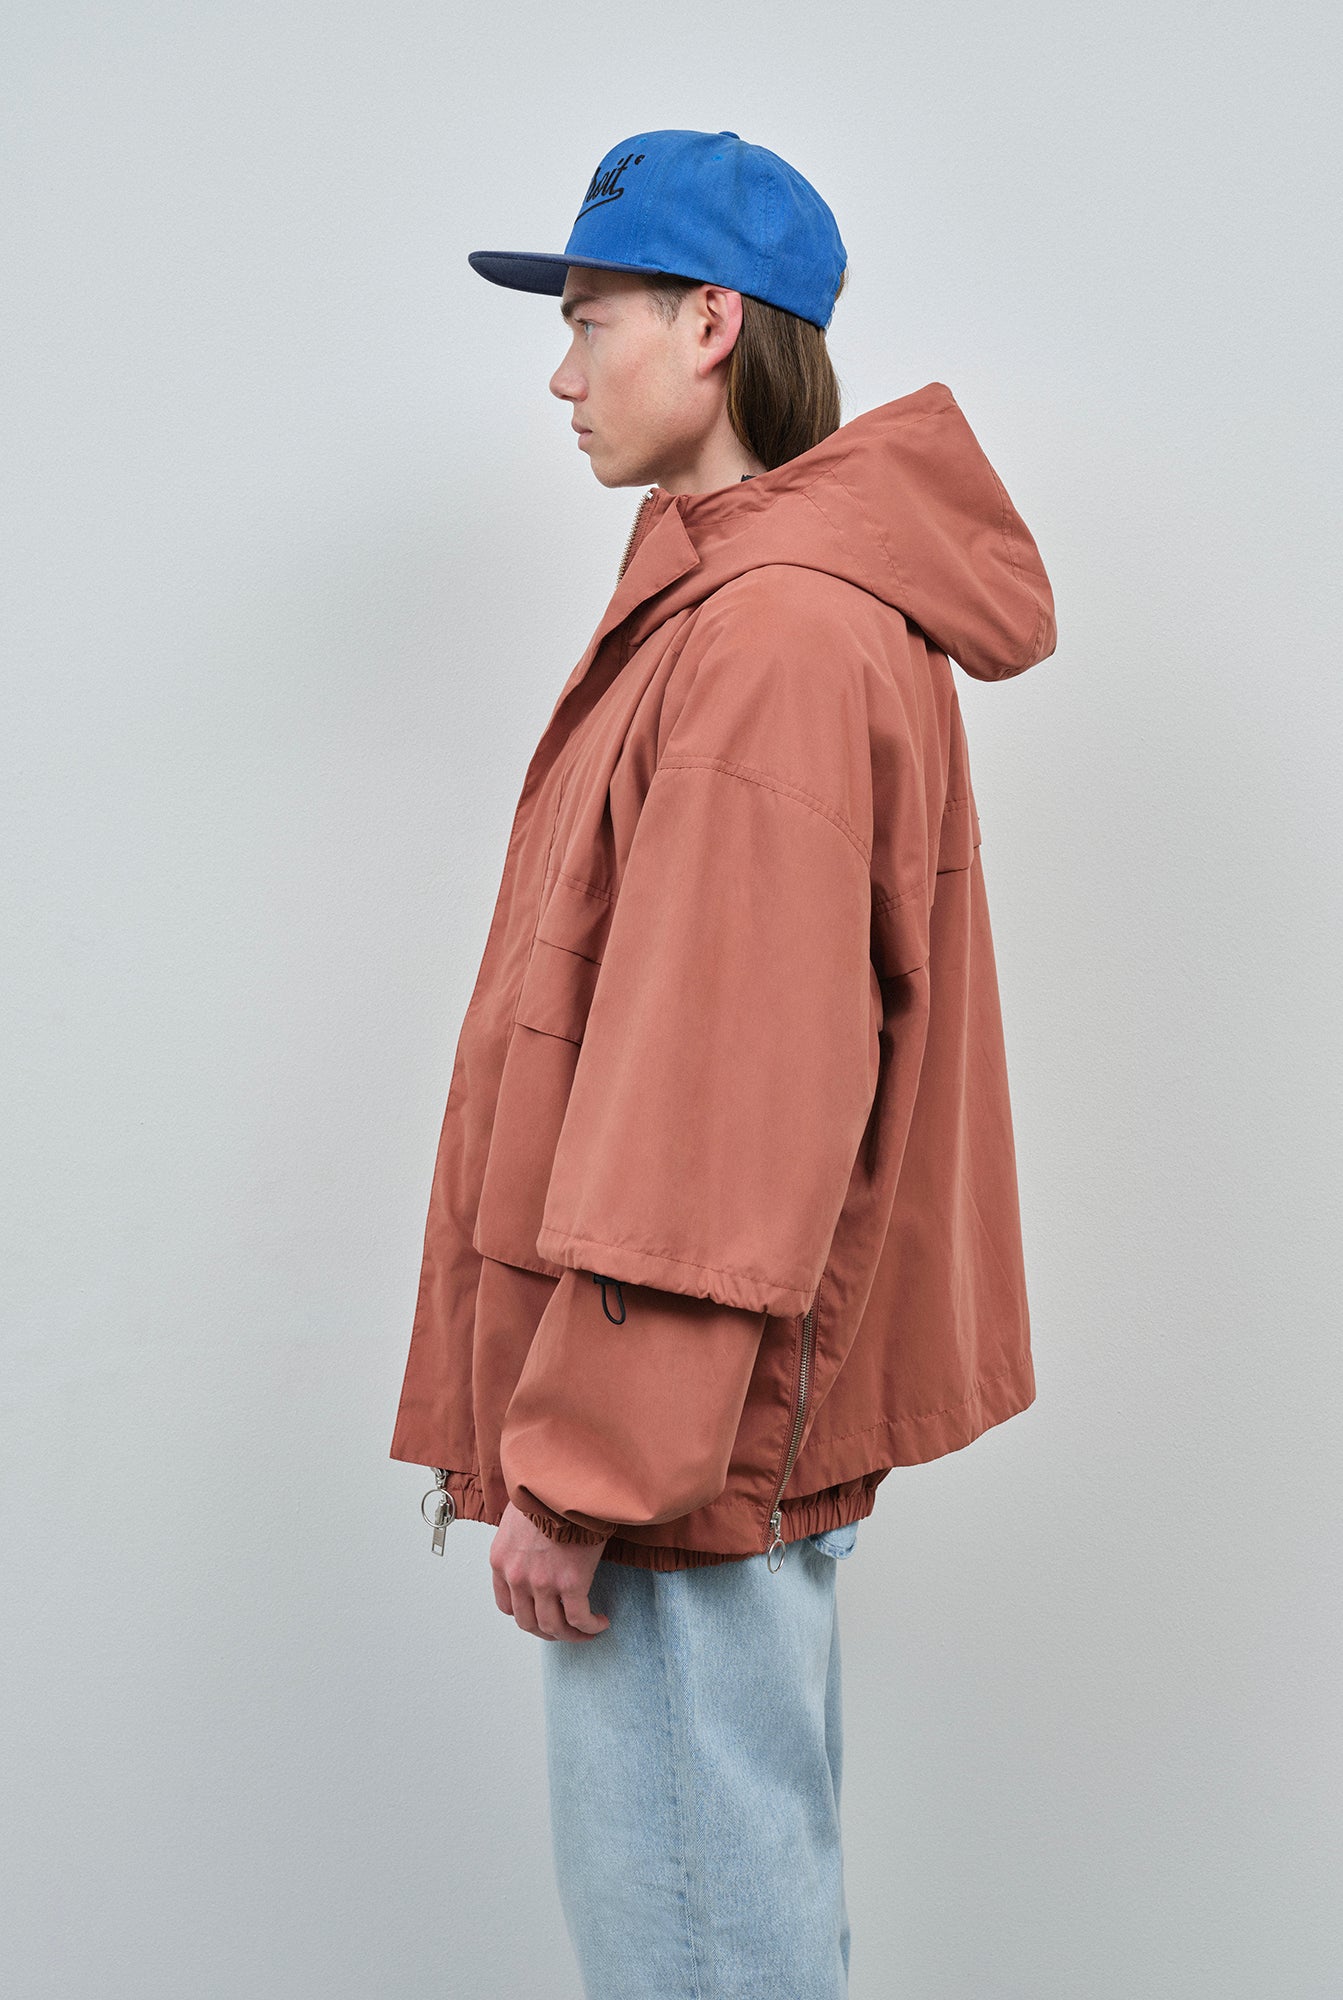 tyby-utility-jacket-red-earth-223-embassy-of-bricks-and-logs-629.jpg